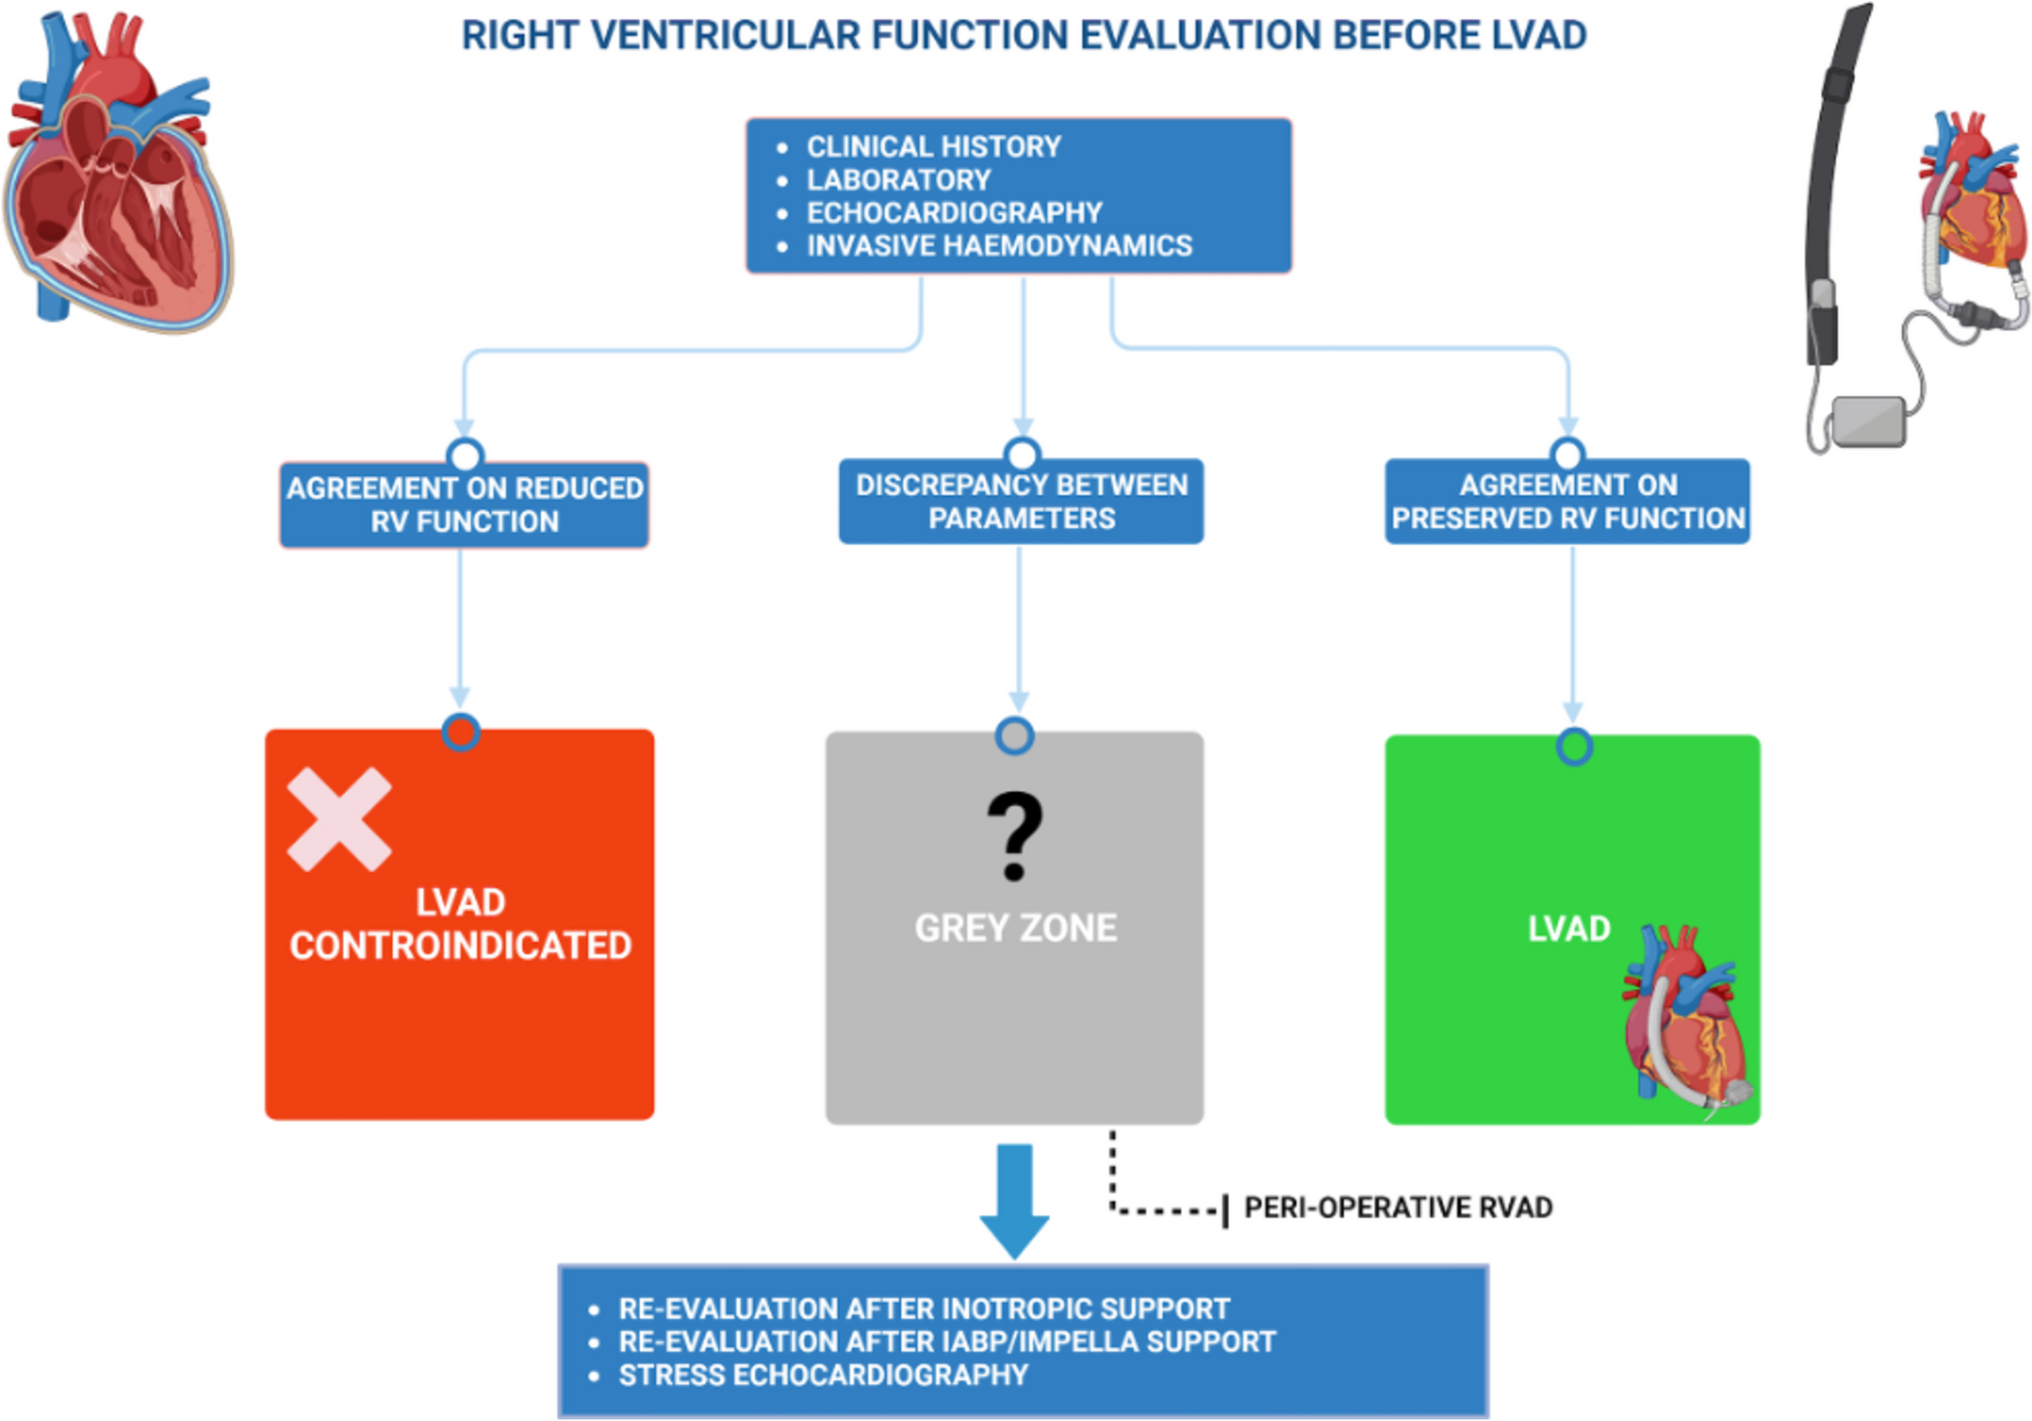 Right ventricular dysfunction in left ventricular assist device candidates: is it time to change our prospective?